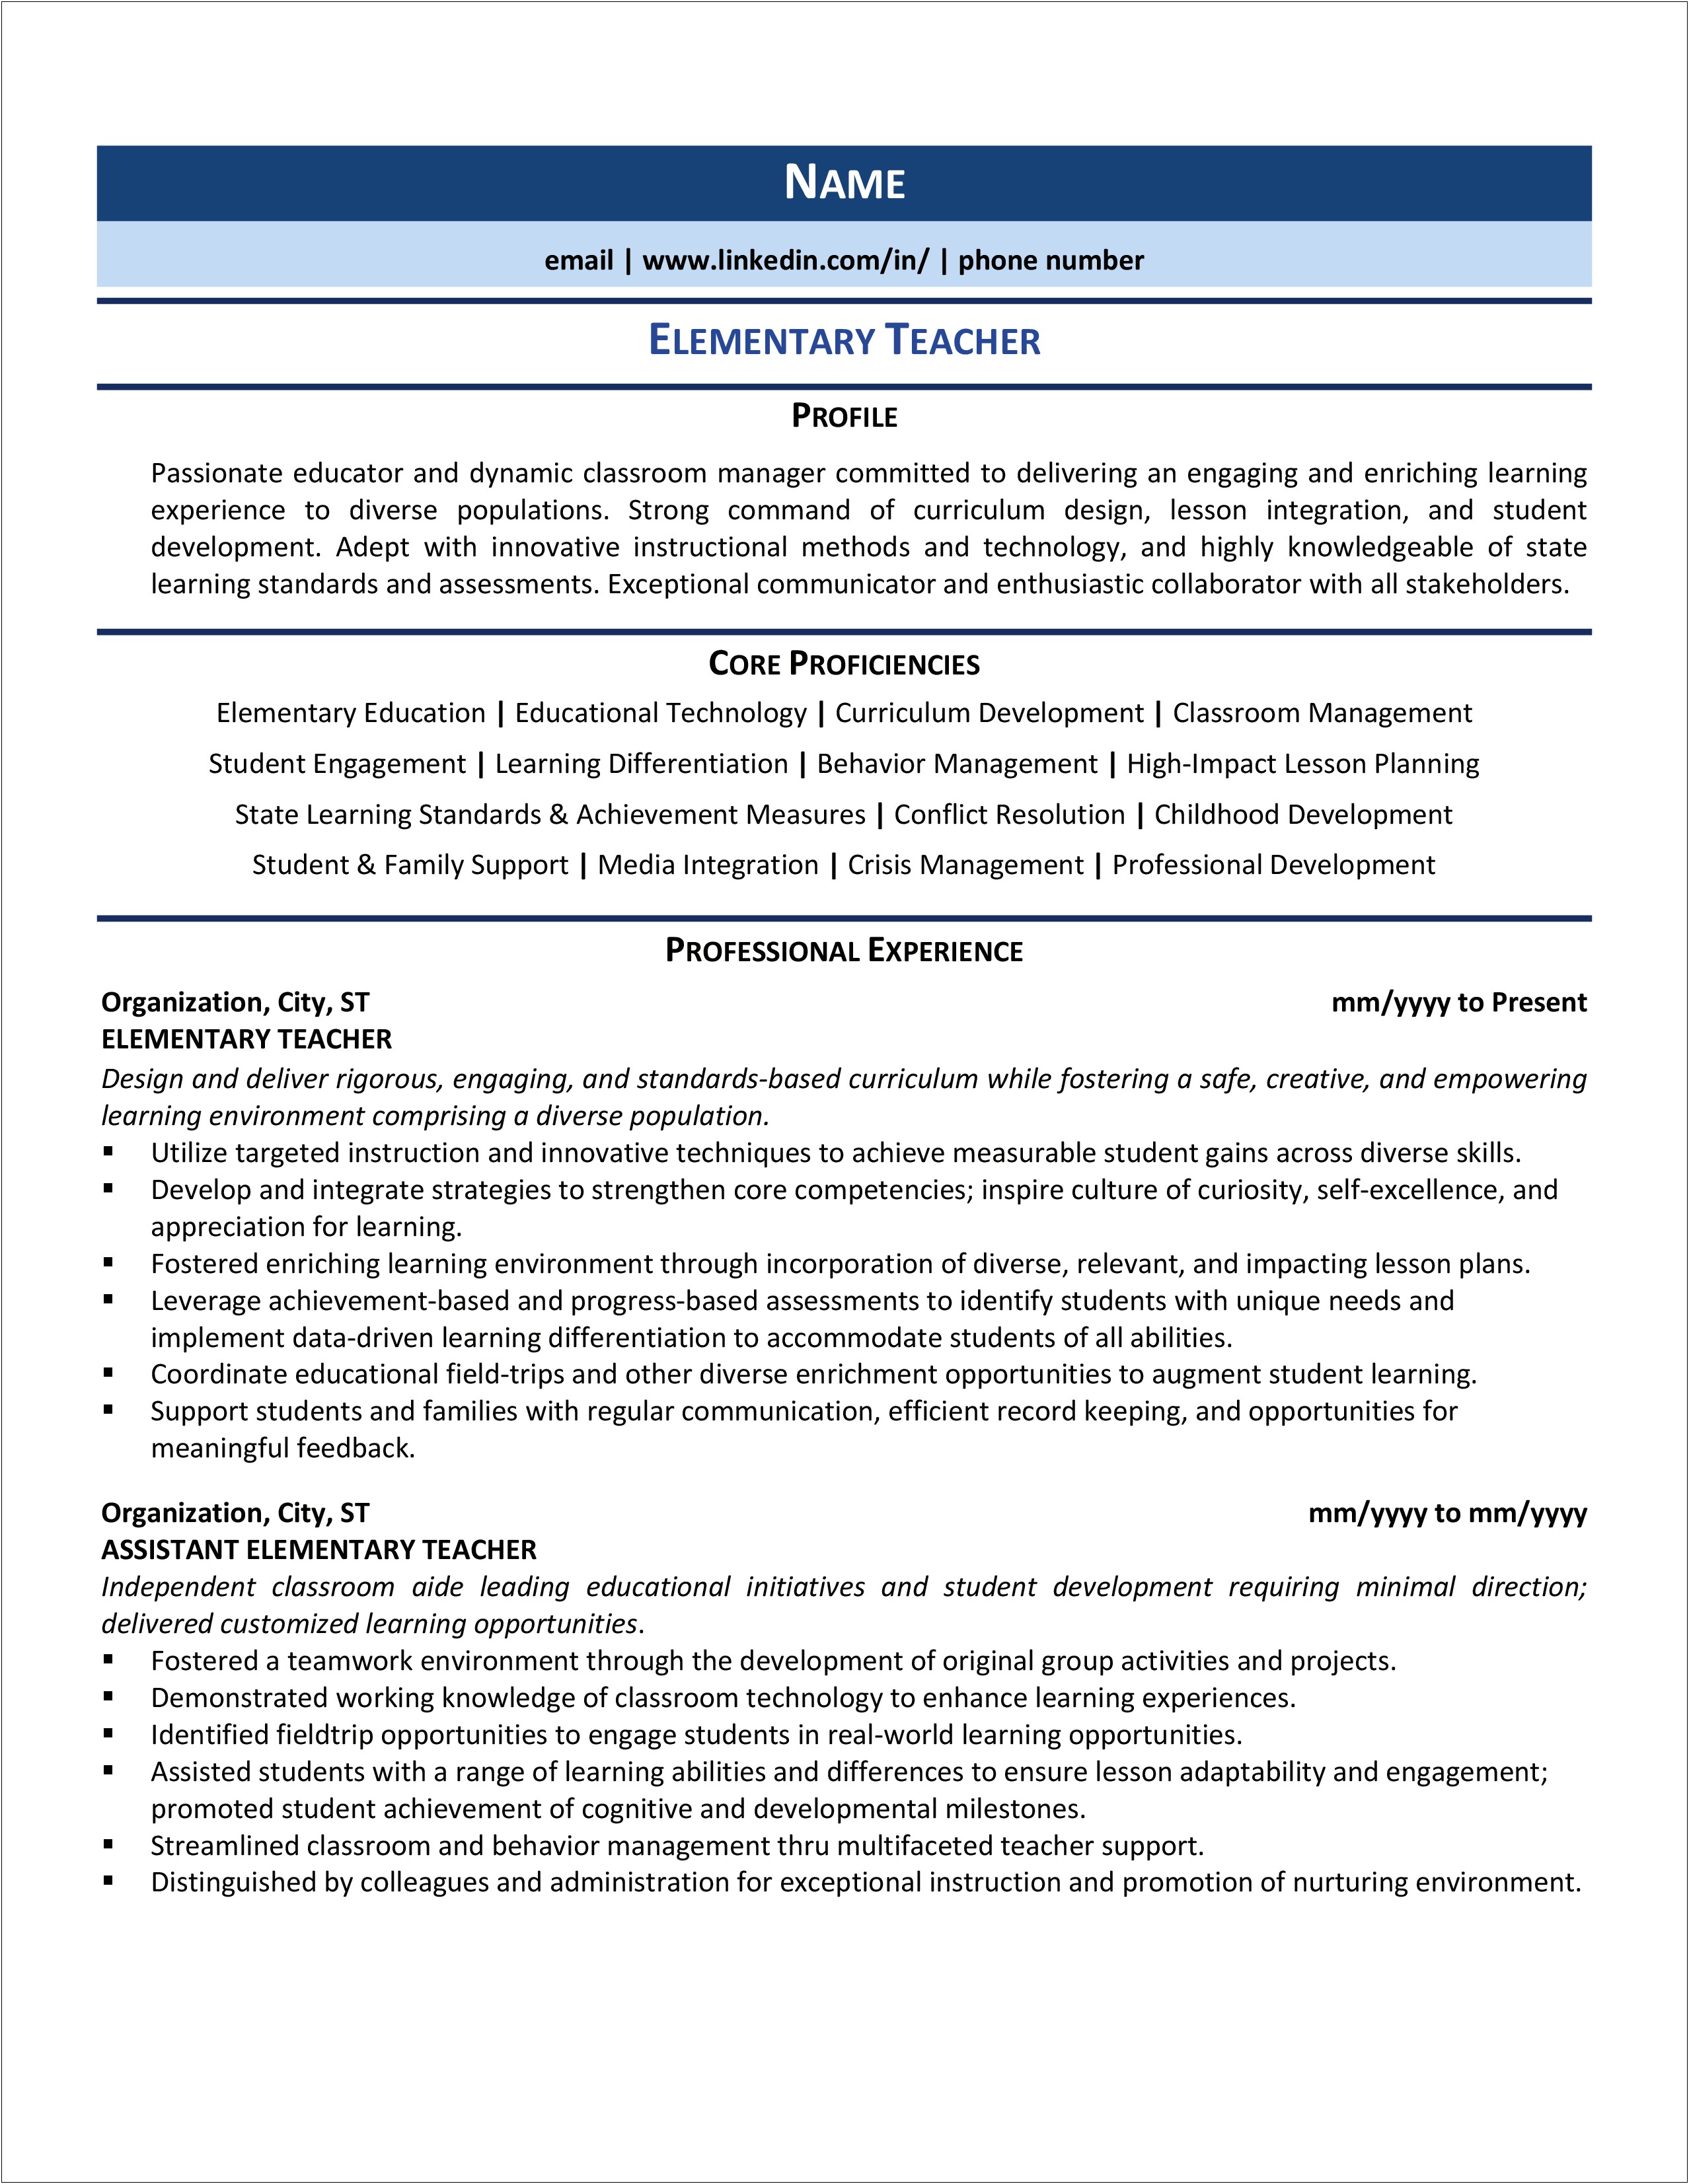 Examples Of Elementary Education Resumes